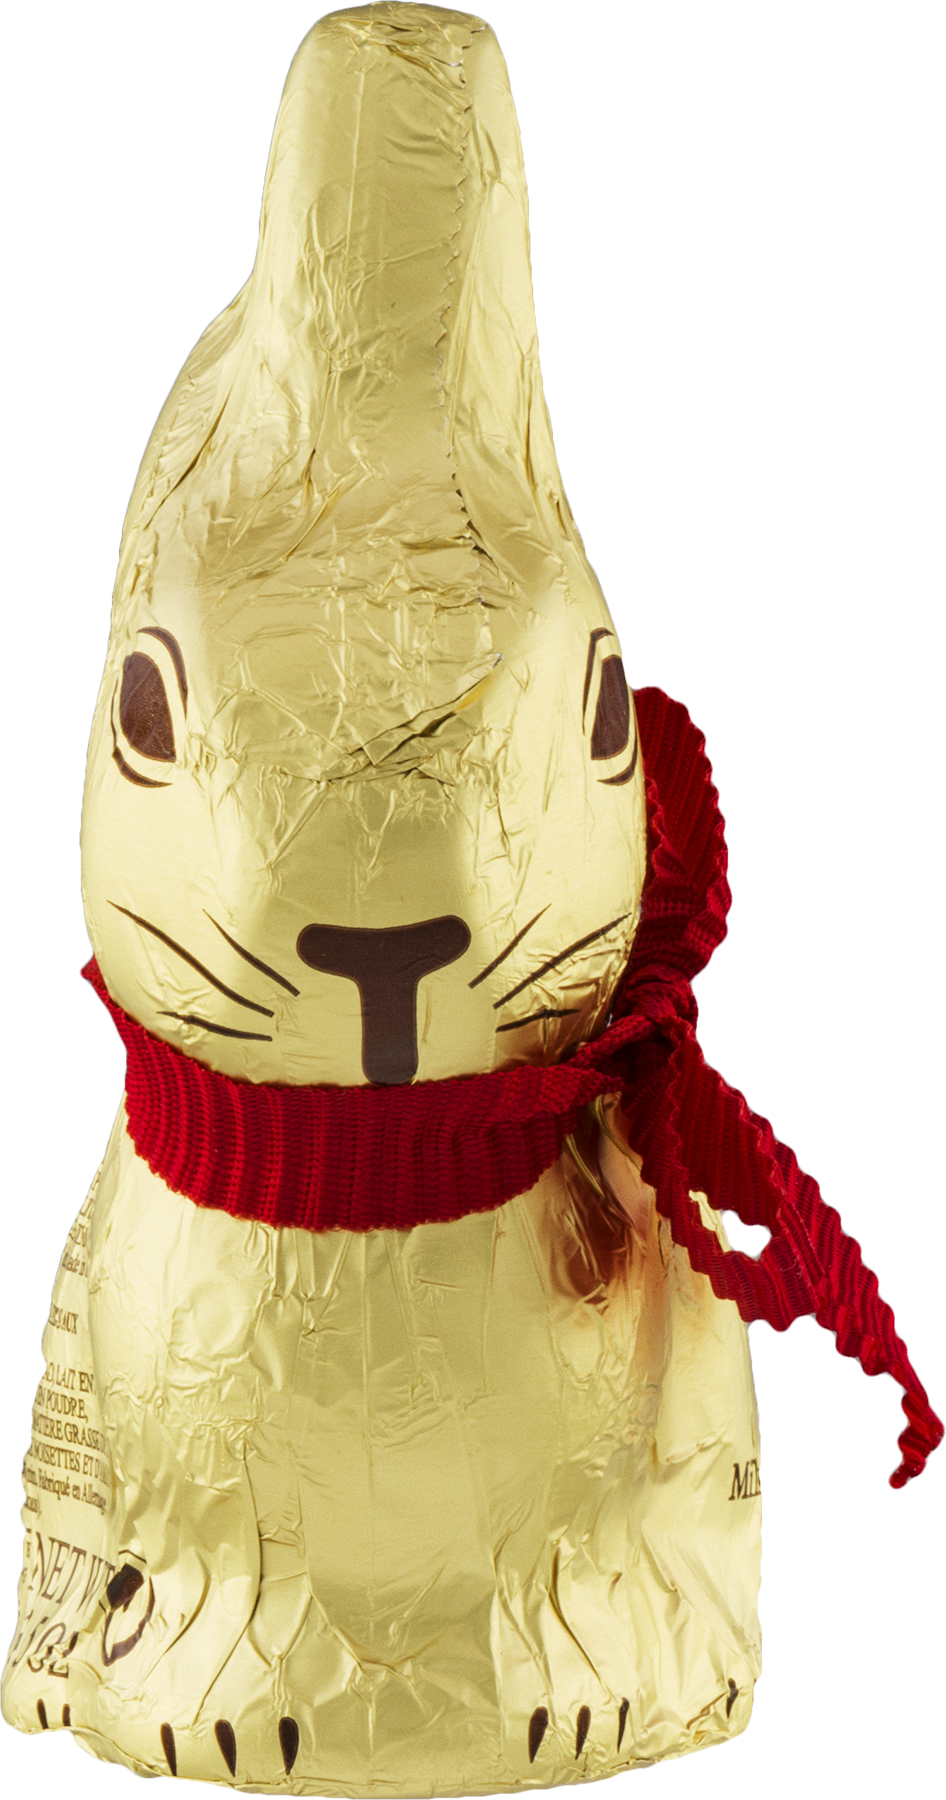 Lindt Easter Milk Chocolate Gold Bunny, 3.5 Oz